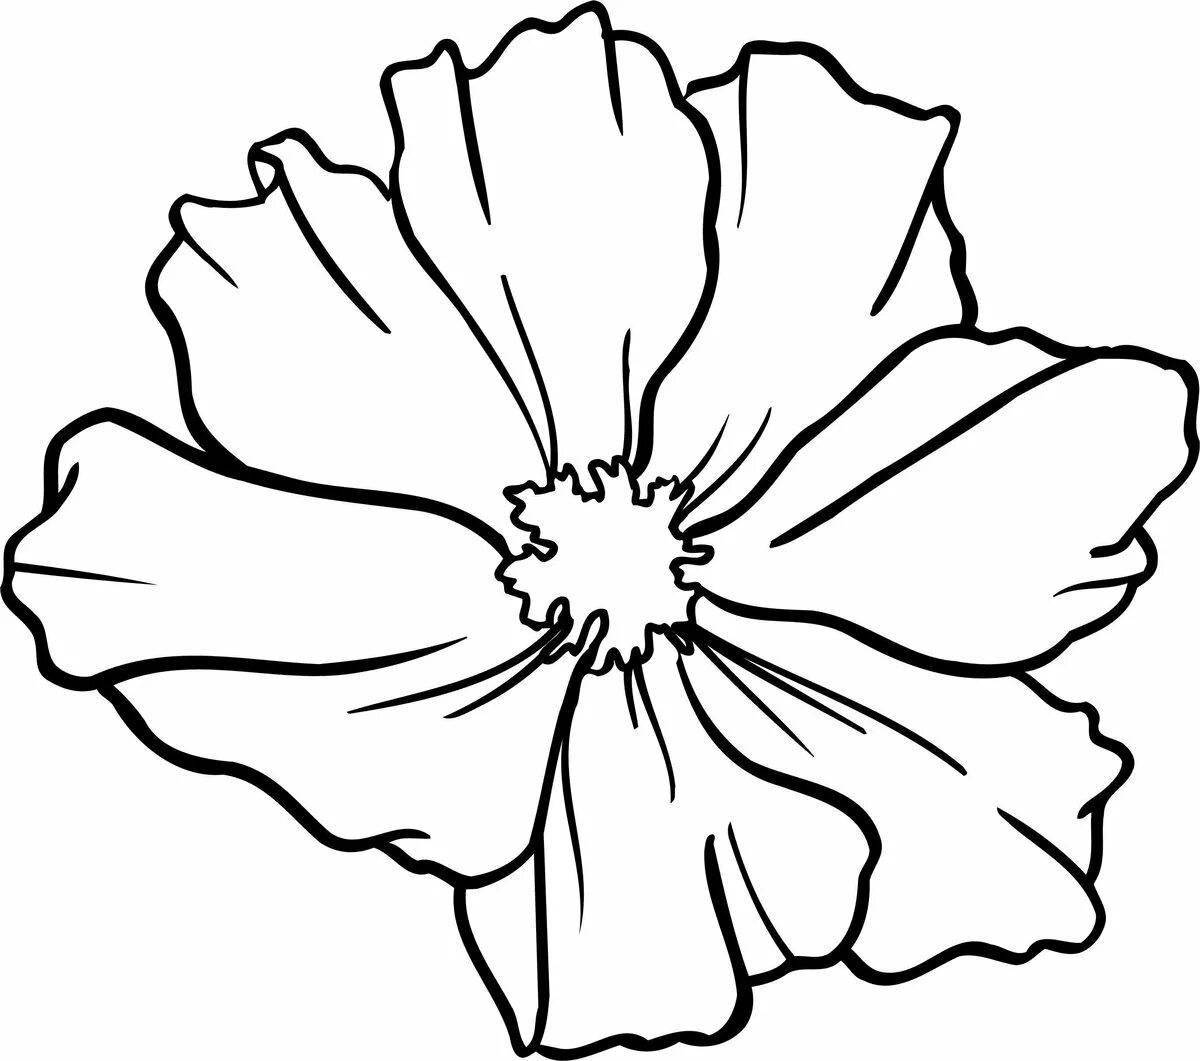 Bright flower coloring book